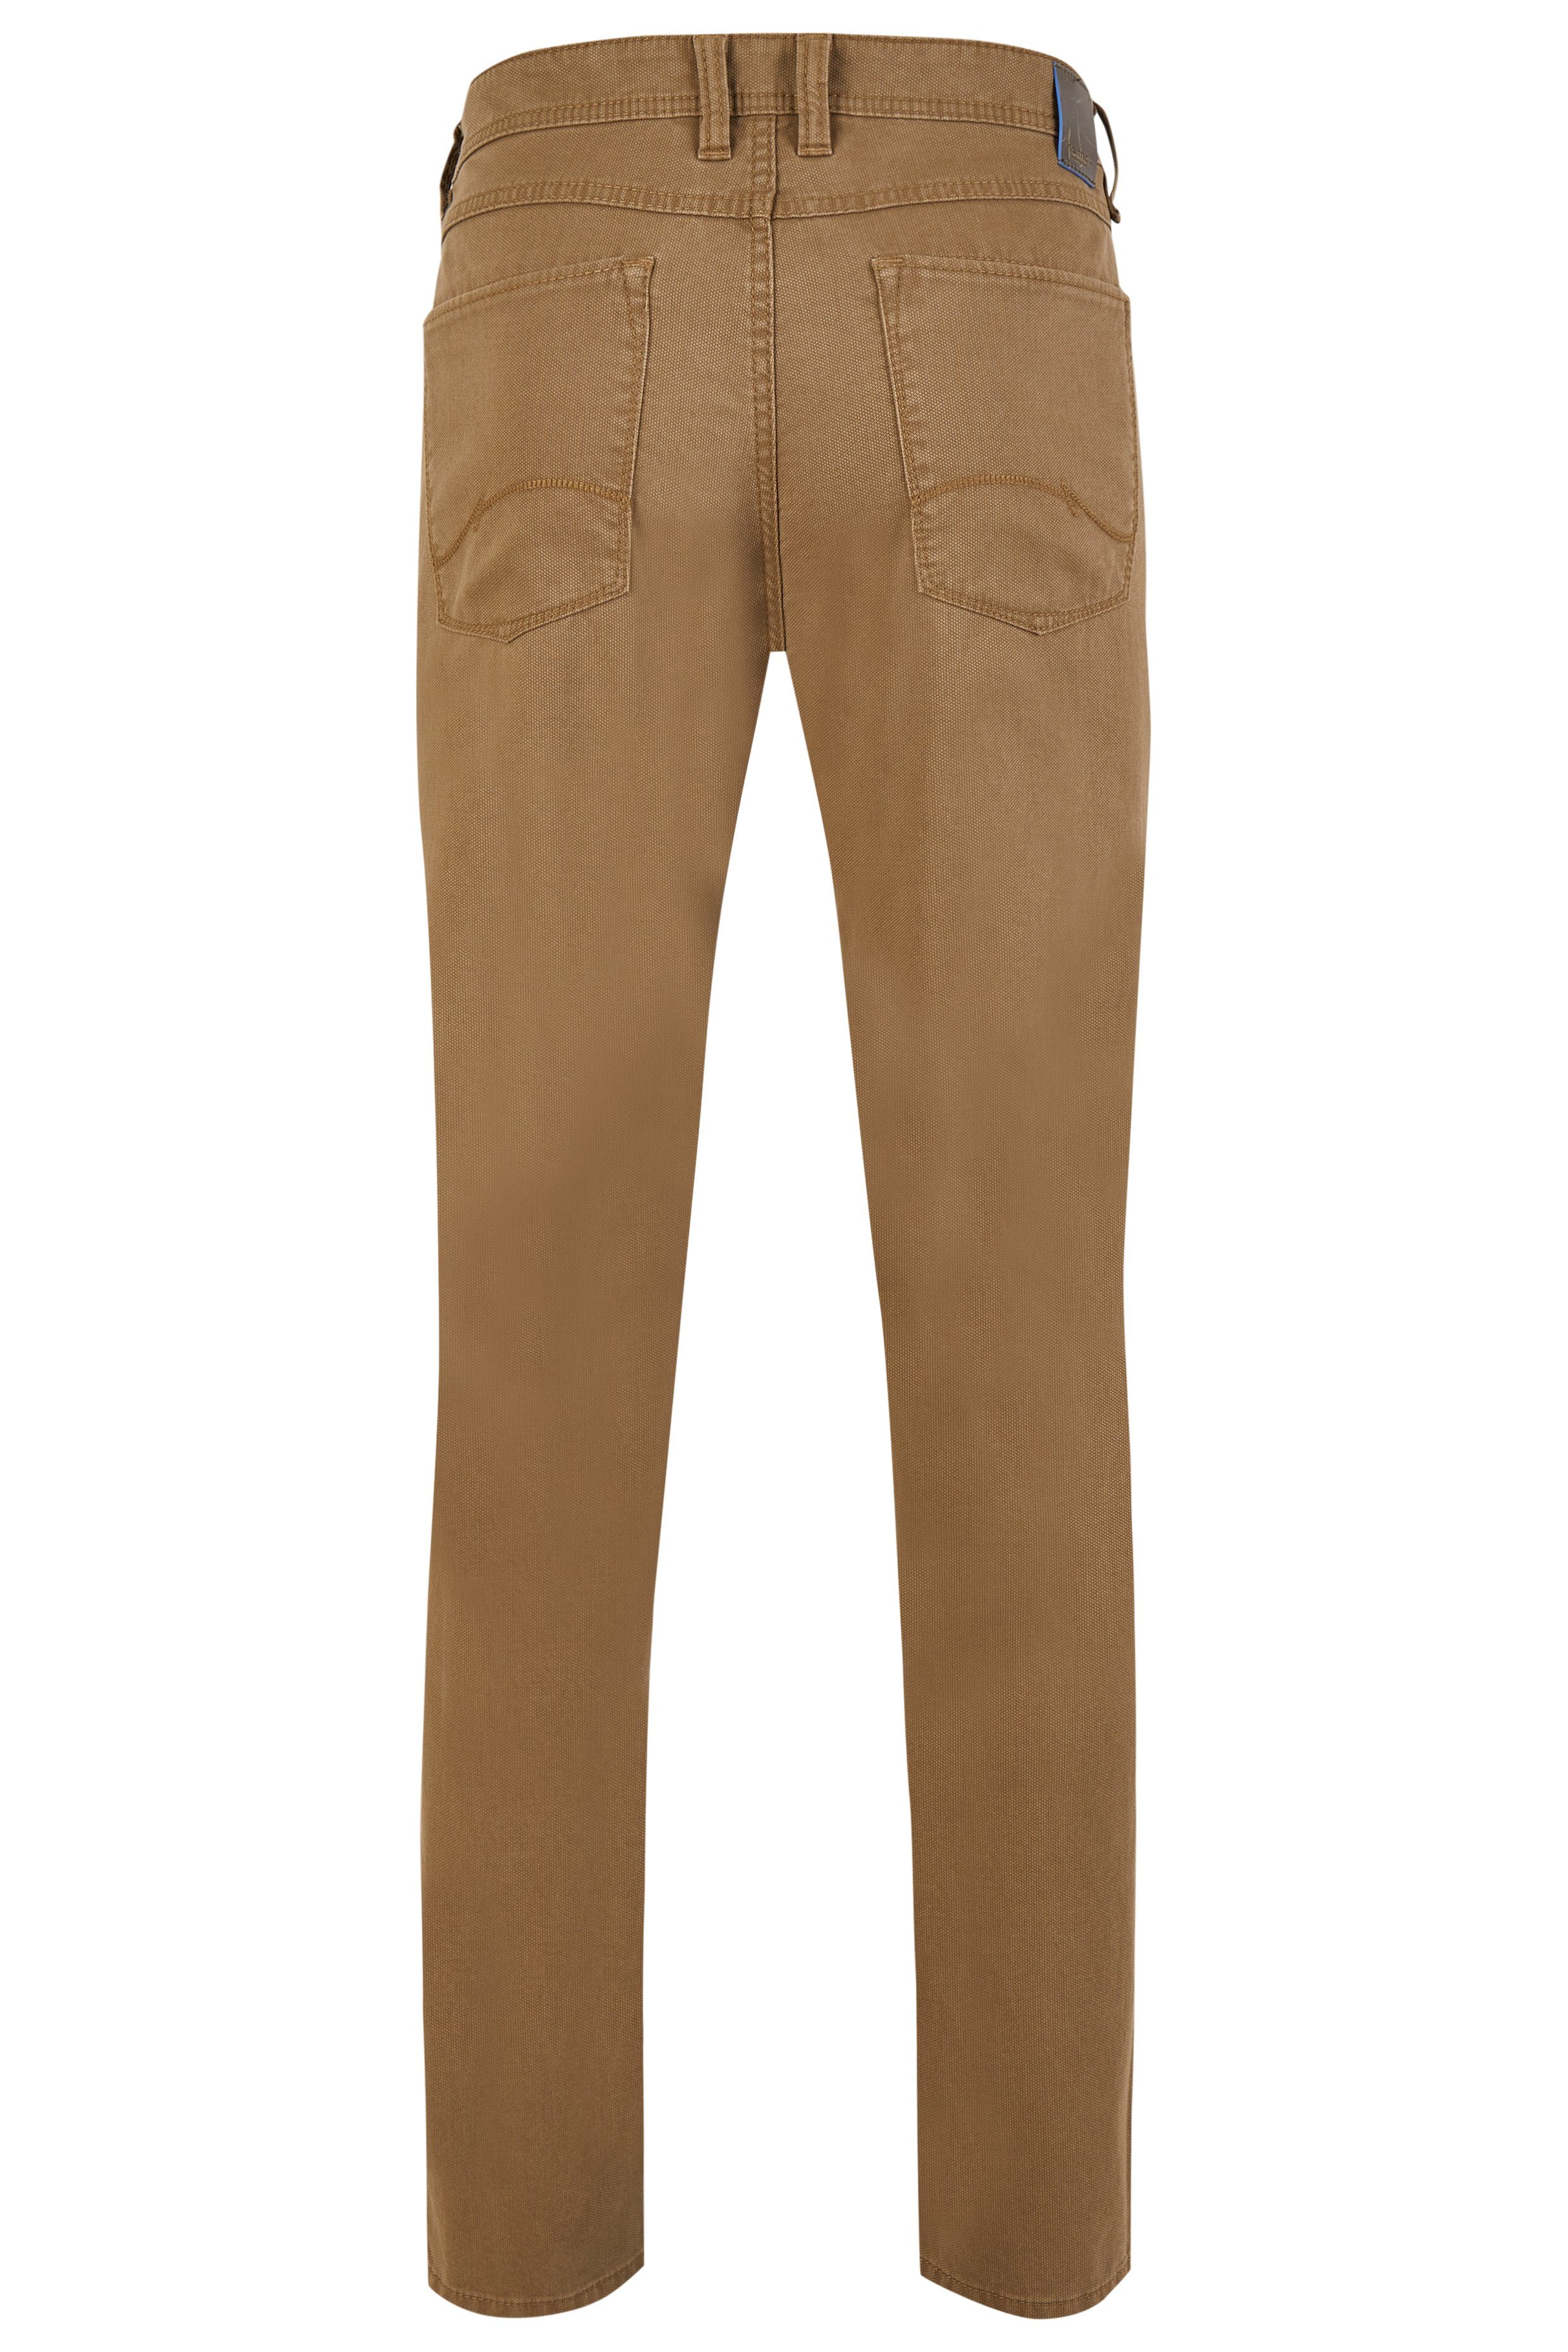 Hattric 5-Pocket-Jeans HATTRIC HUNTER 6334.18 688955 COSY STRUCTURE beige 